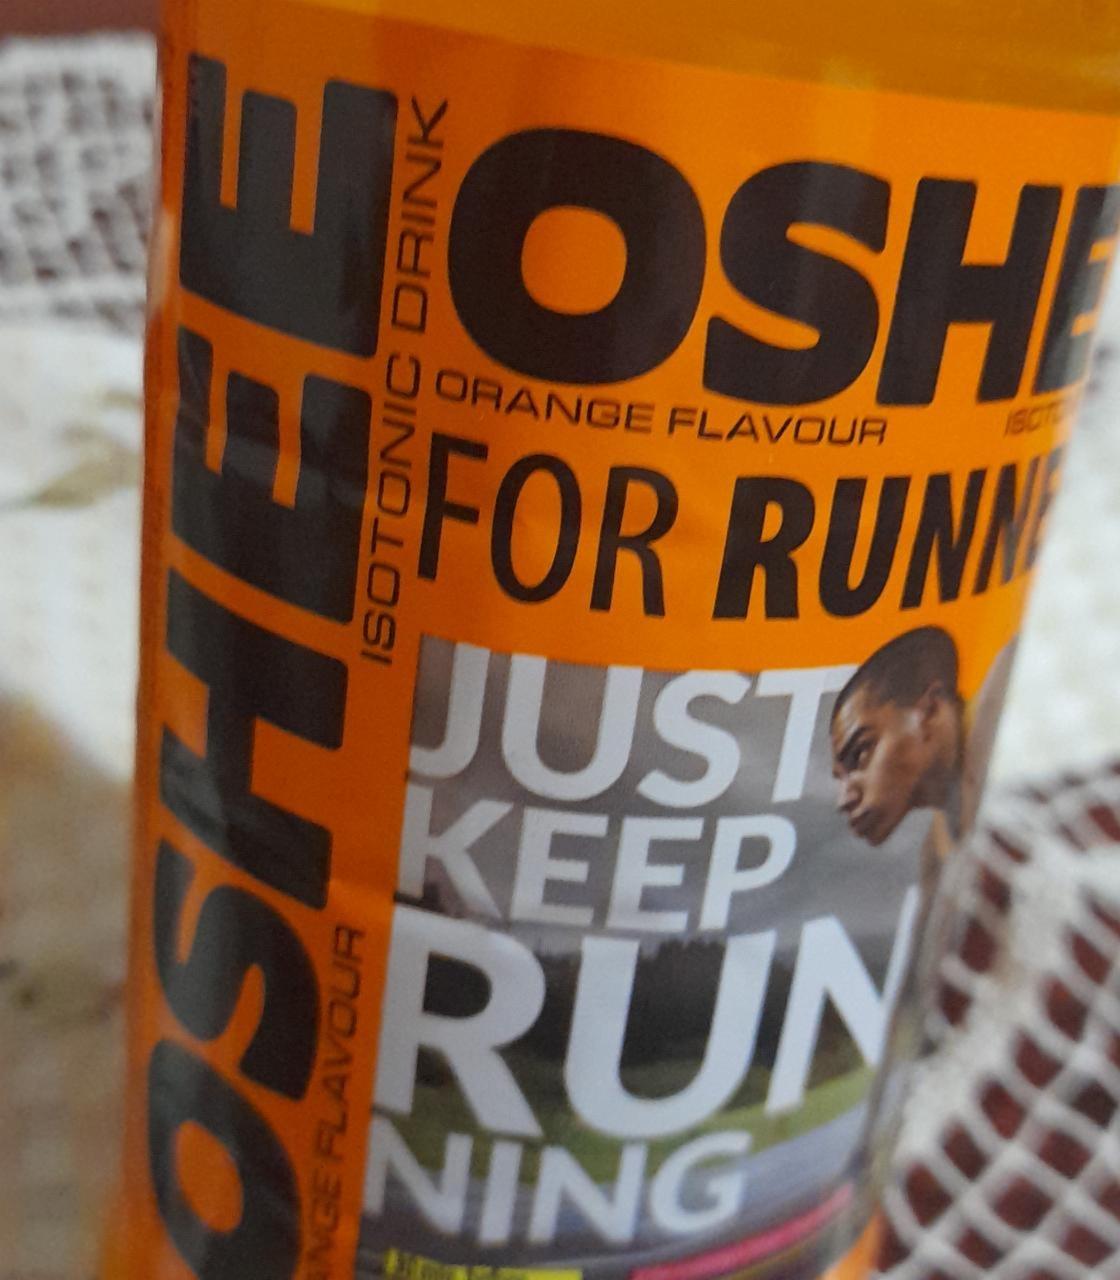 Fotografie - Oshee Isotonic Drink Orange flavour For runners